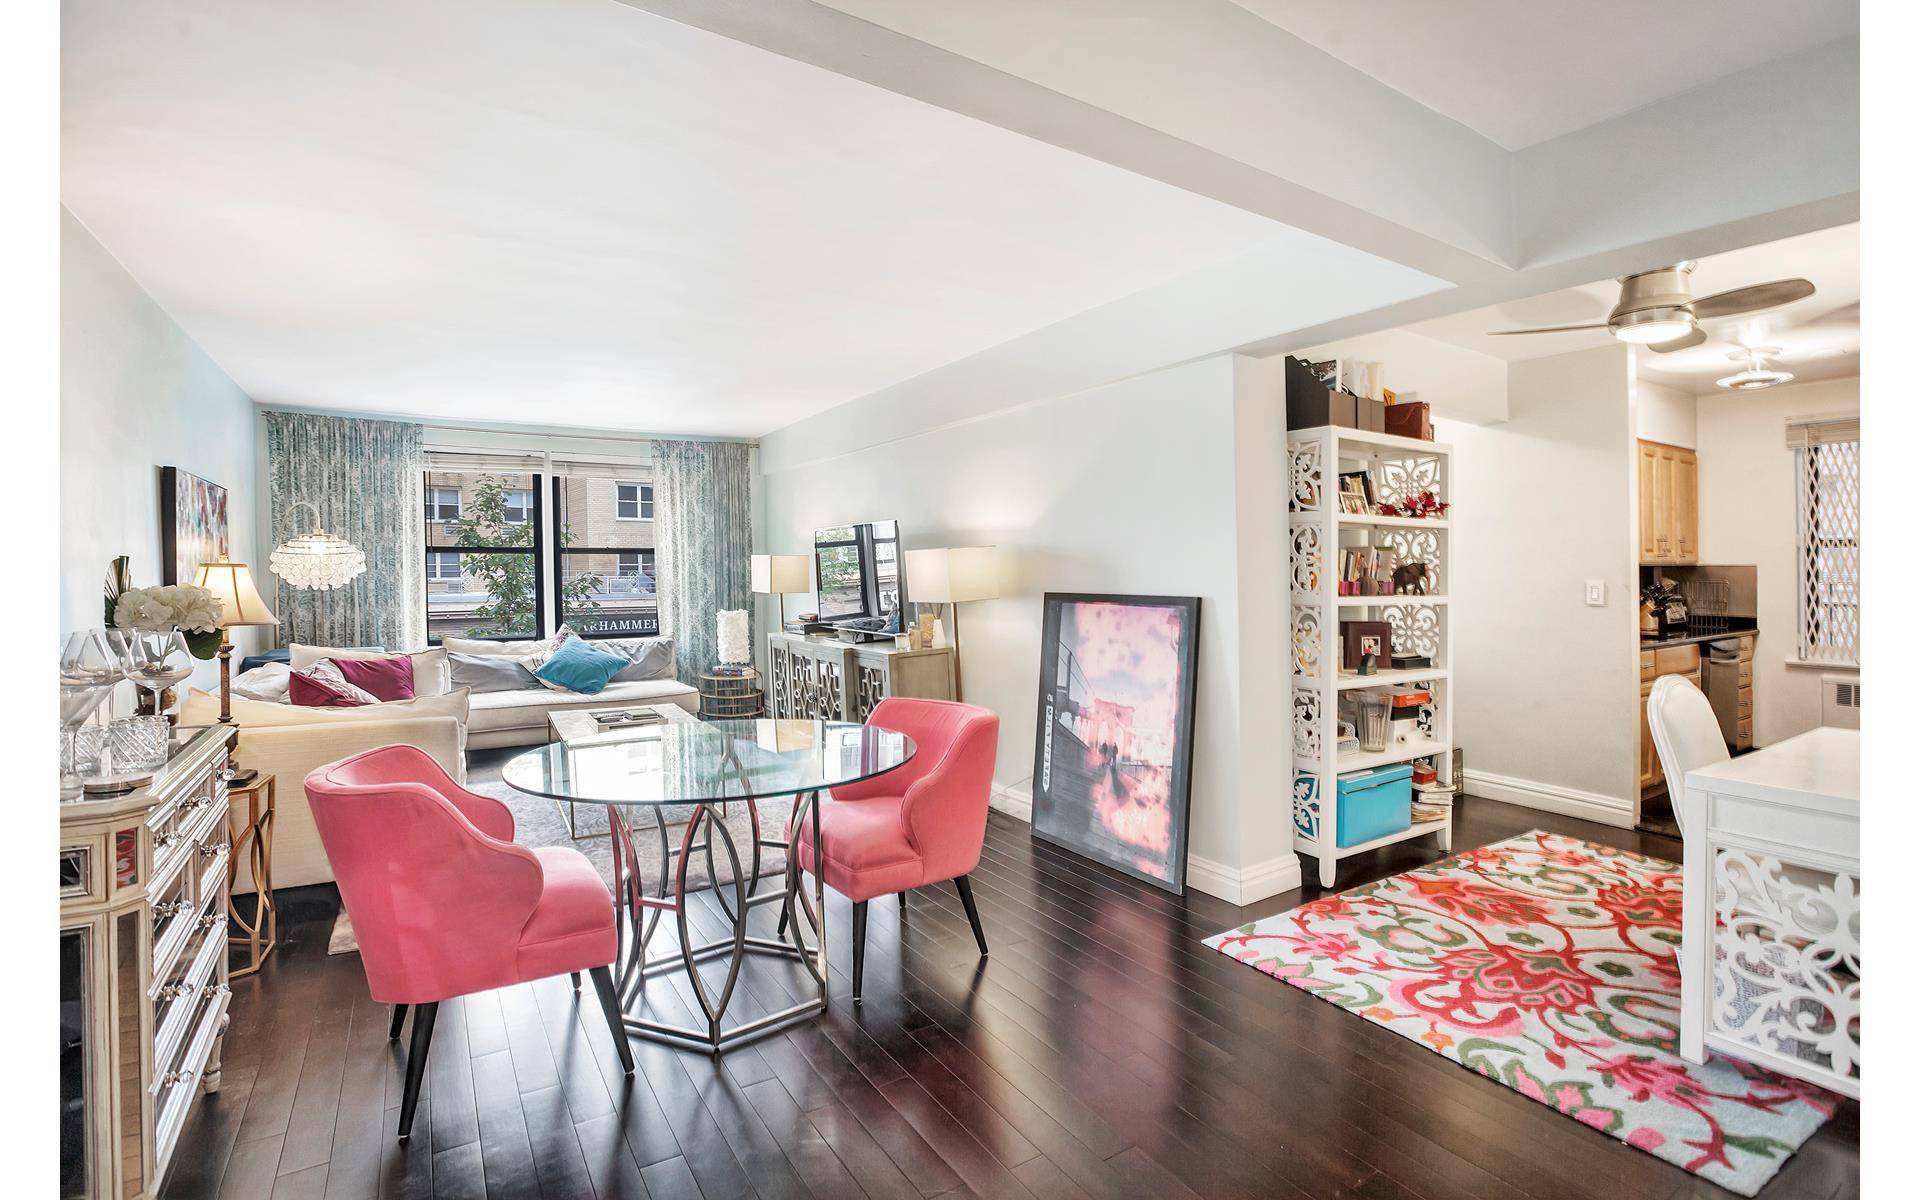 Extremely well priced corner 1 bedroom in the heart of the very desirable Greenwich Village.